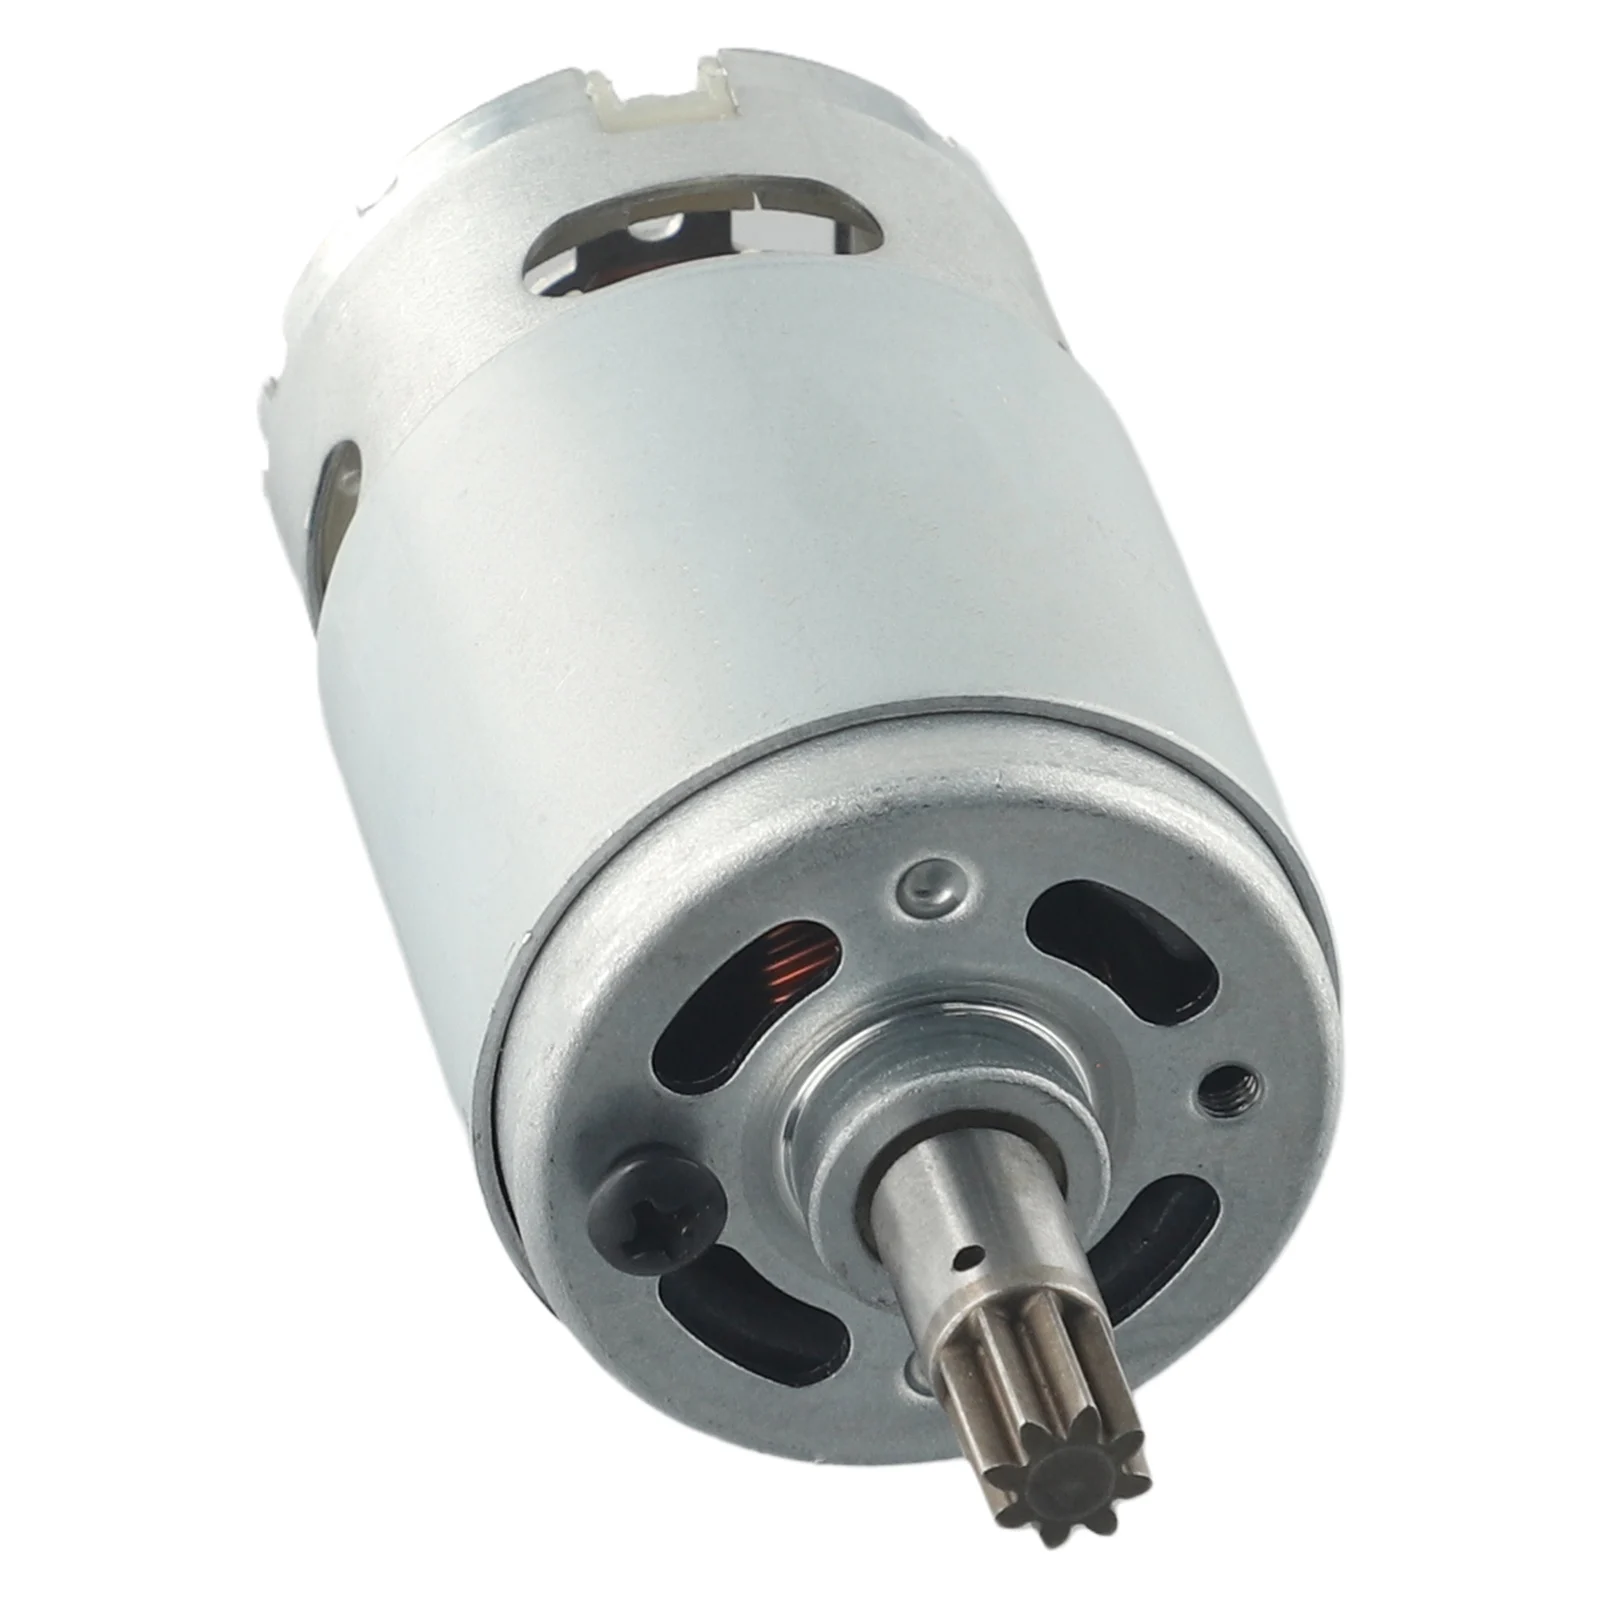 

DC18V 8teeth Motor RS-550VD-6532 H3 For WORX 50027484 WU390 WX390 WX390.1 Electric Drill Metal Gear Motor 7.7mm Tooth Pitch Tool